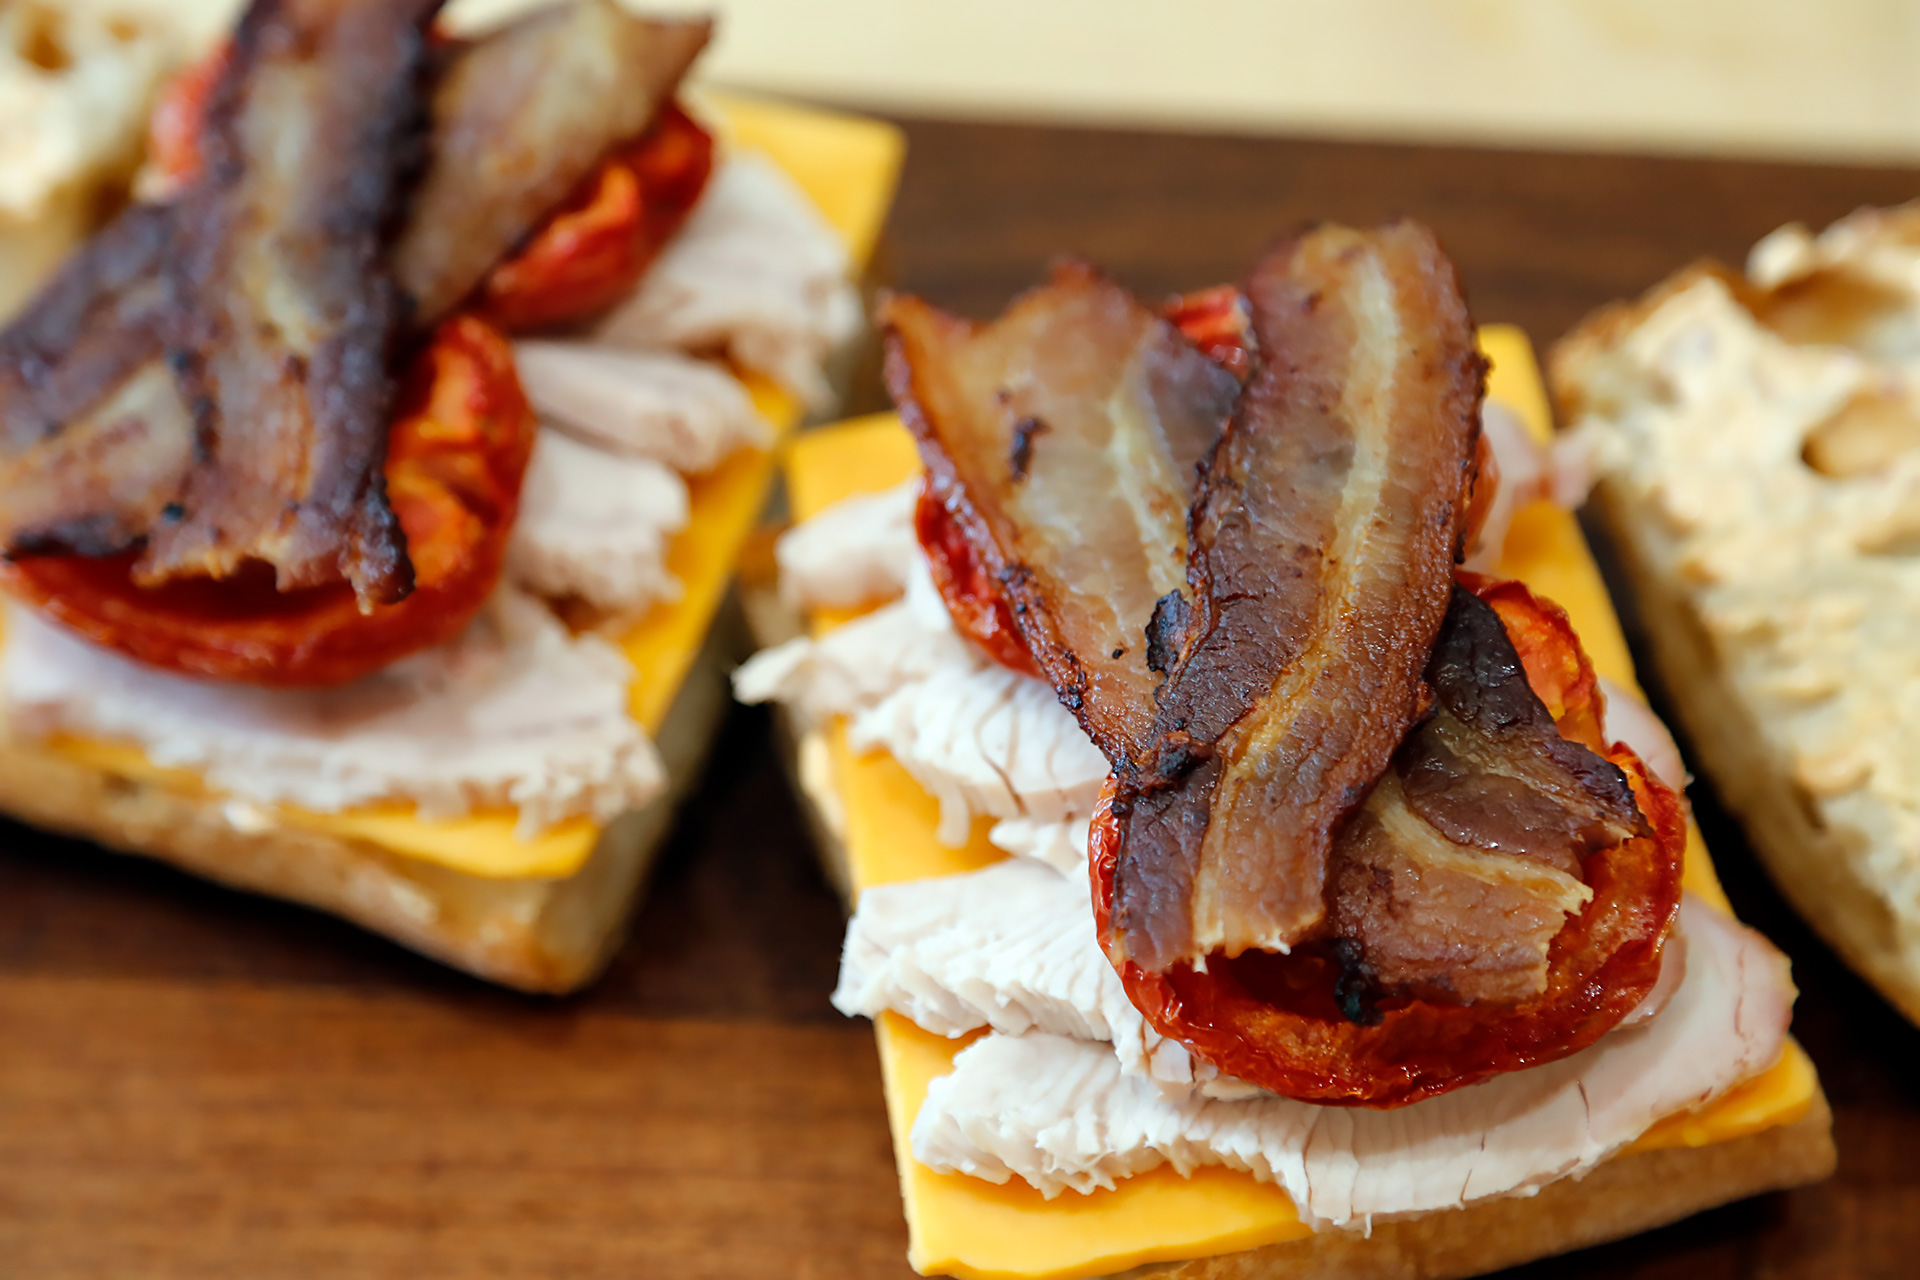 Finally, add a layer of bacon.